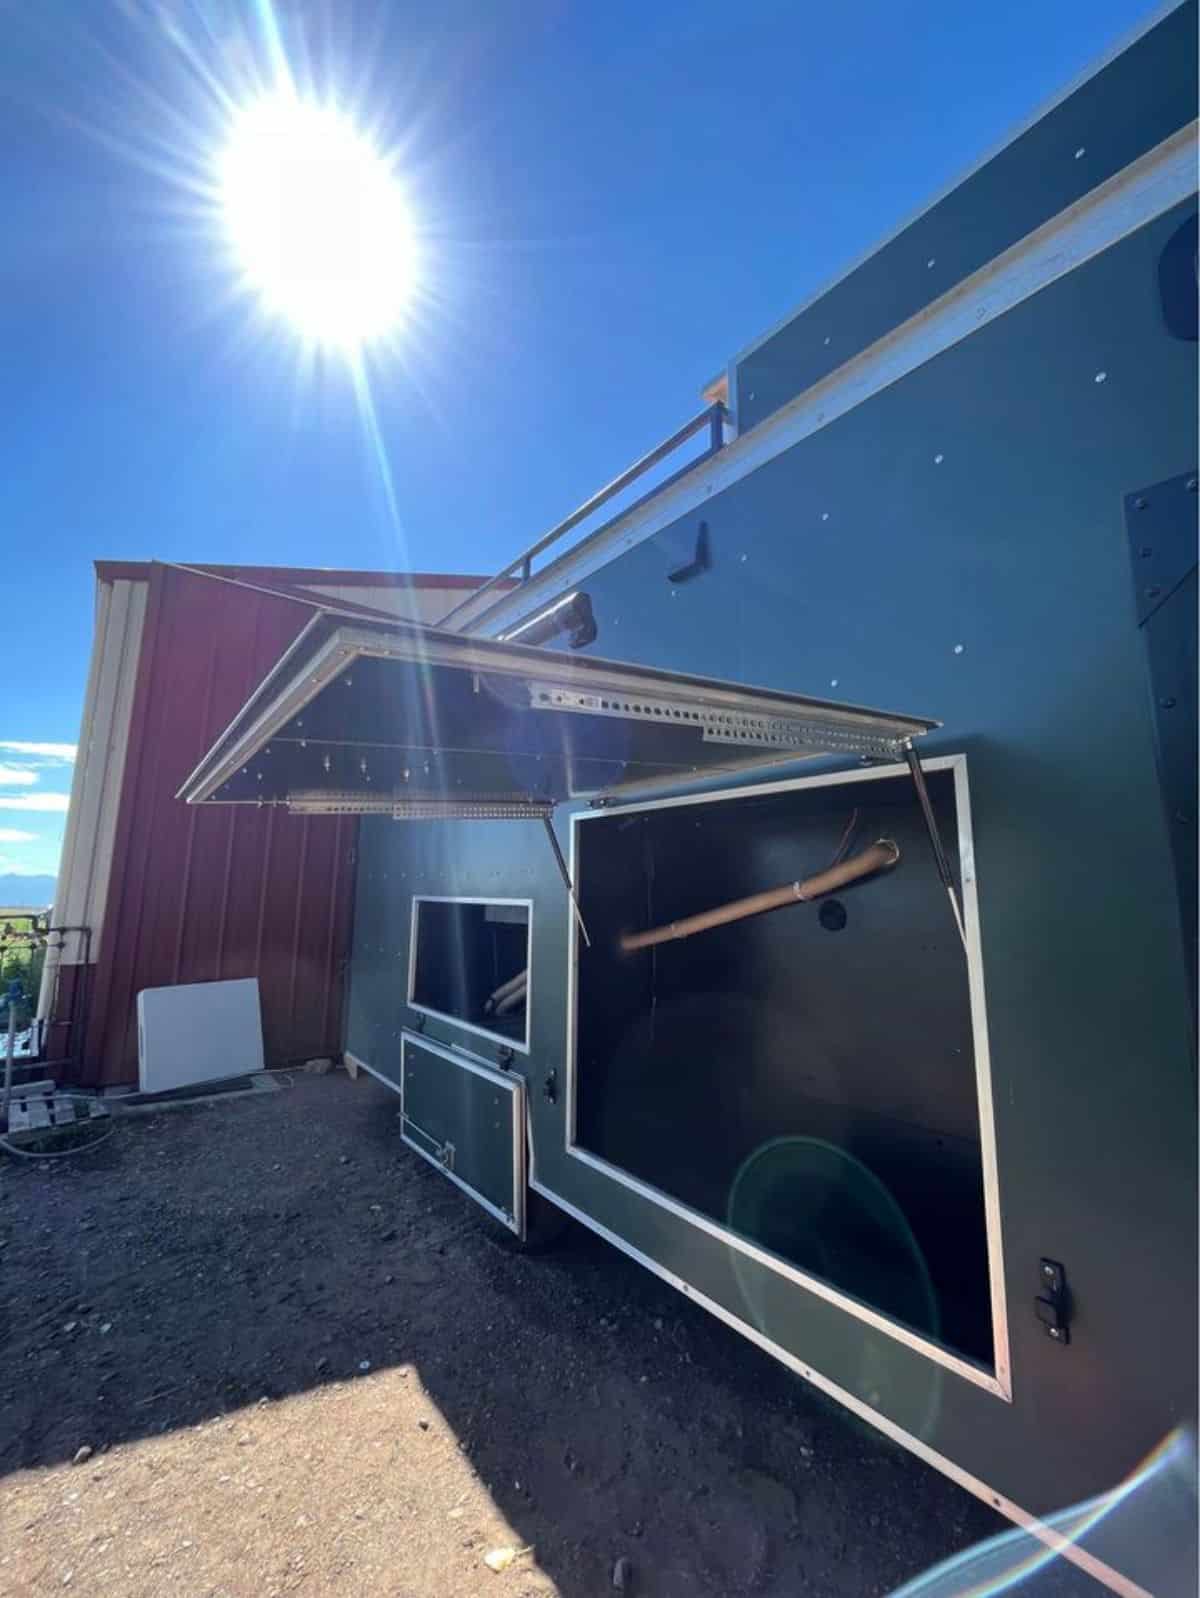 Stunning exterior of Off the grid camper